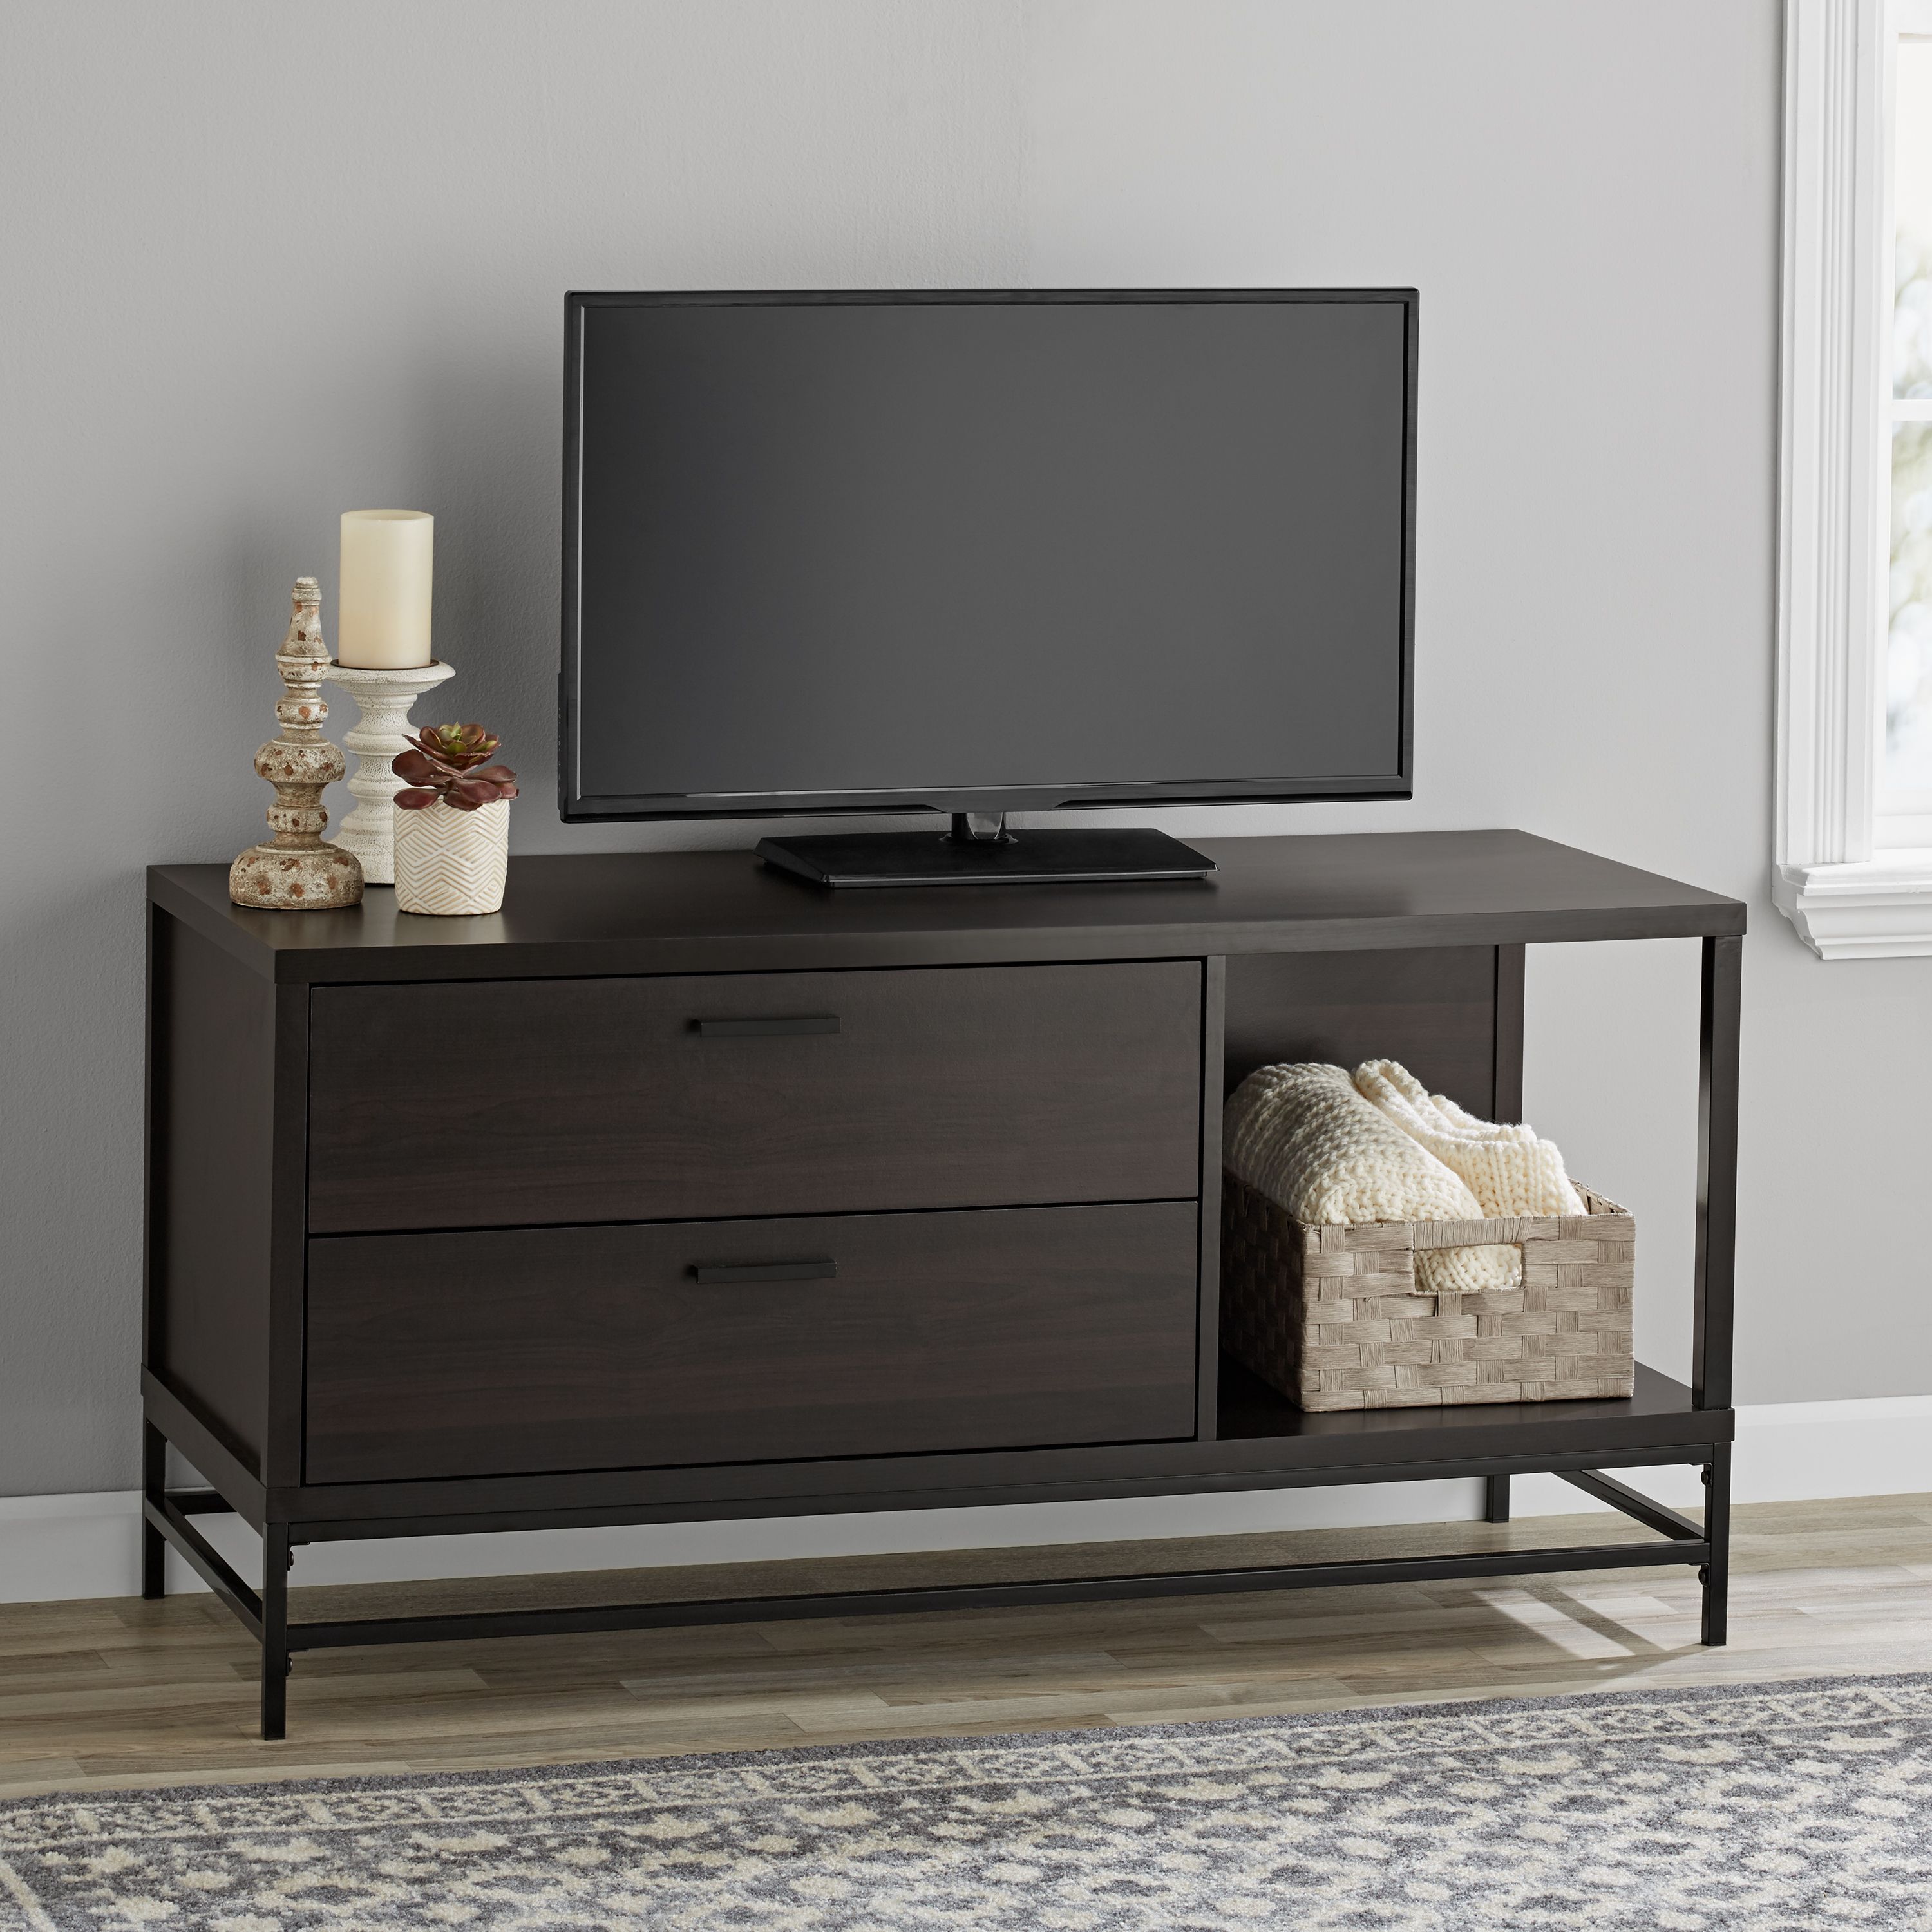 Mainstays Wood and Metal TV Stand for TVs up to 55", Espresso - image 1 of 4